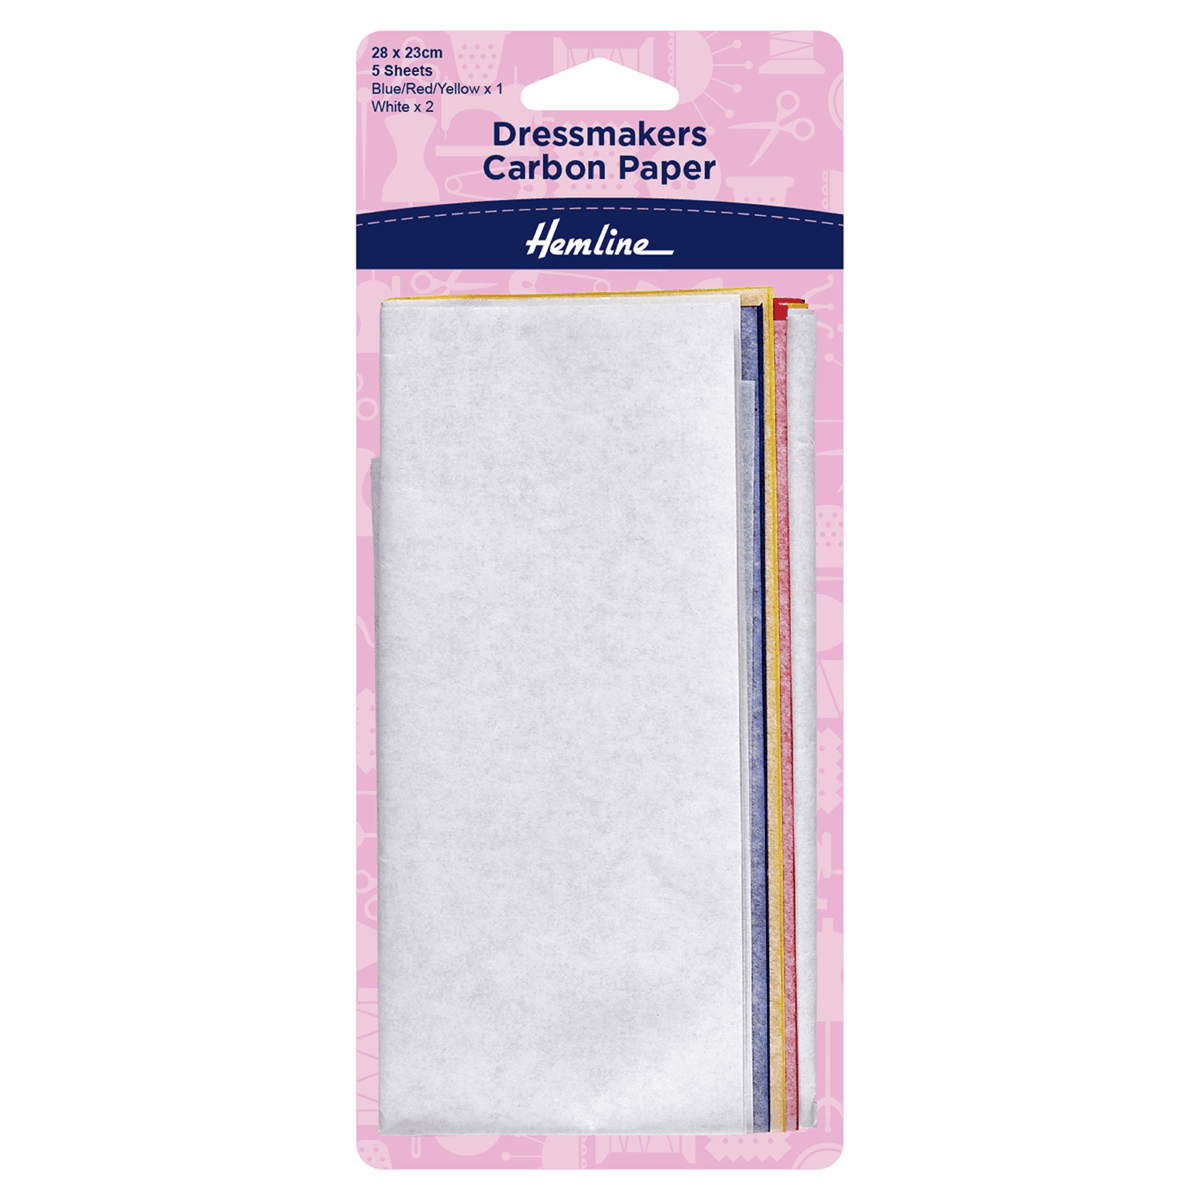 10 Pieces Washable Tracing Paper Sheet Sewing Transfer Paper for Pattern Marking, Size: 23 x 28 cm